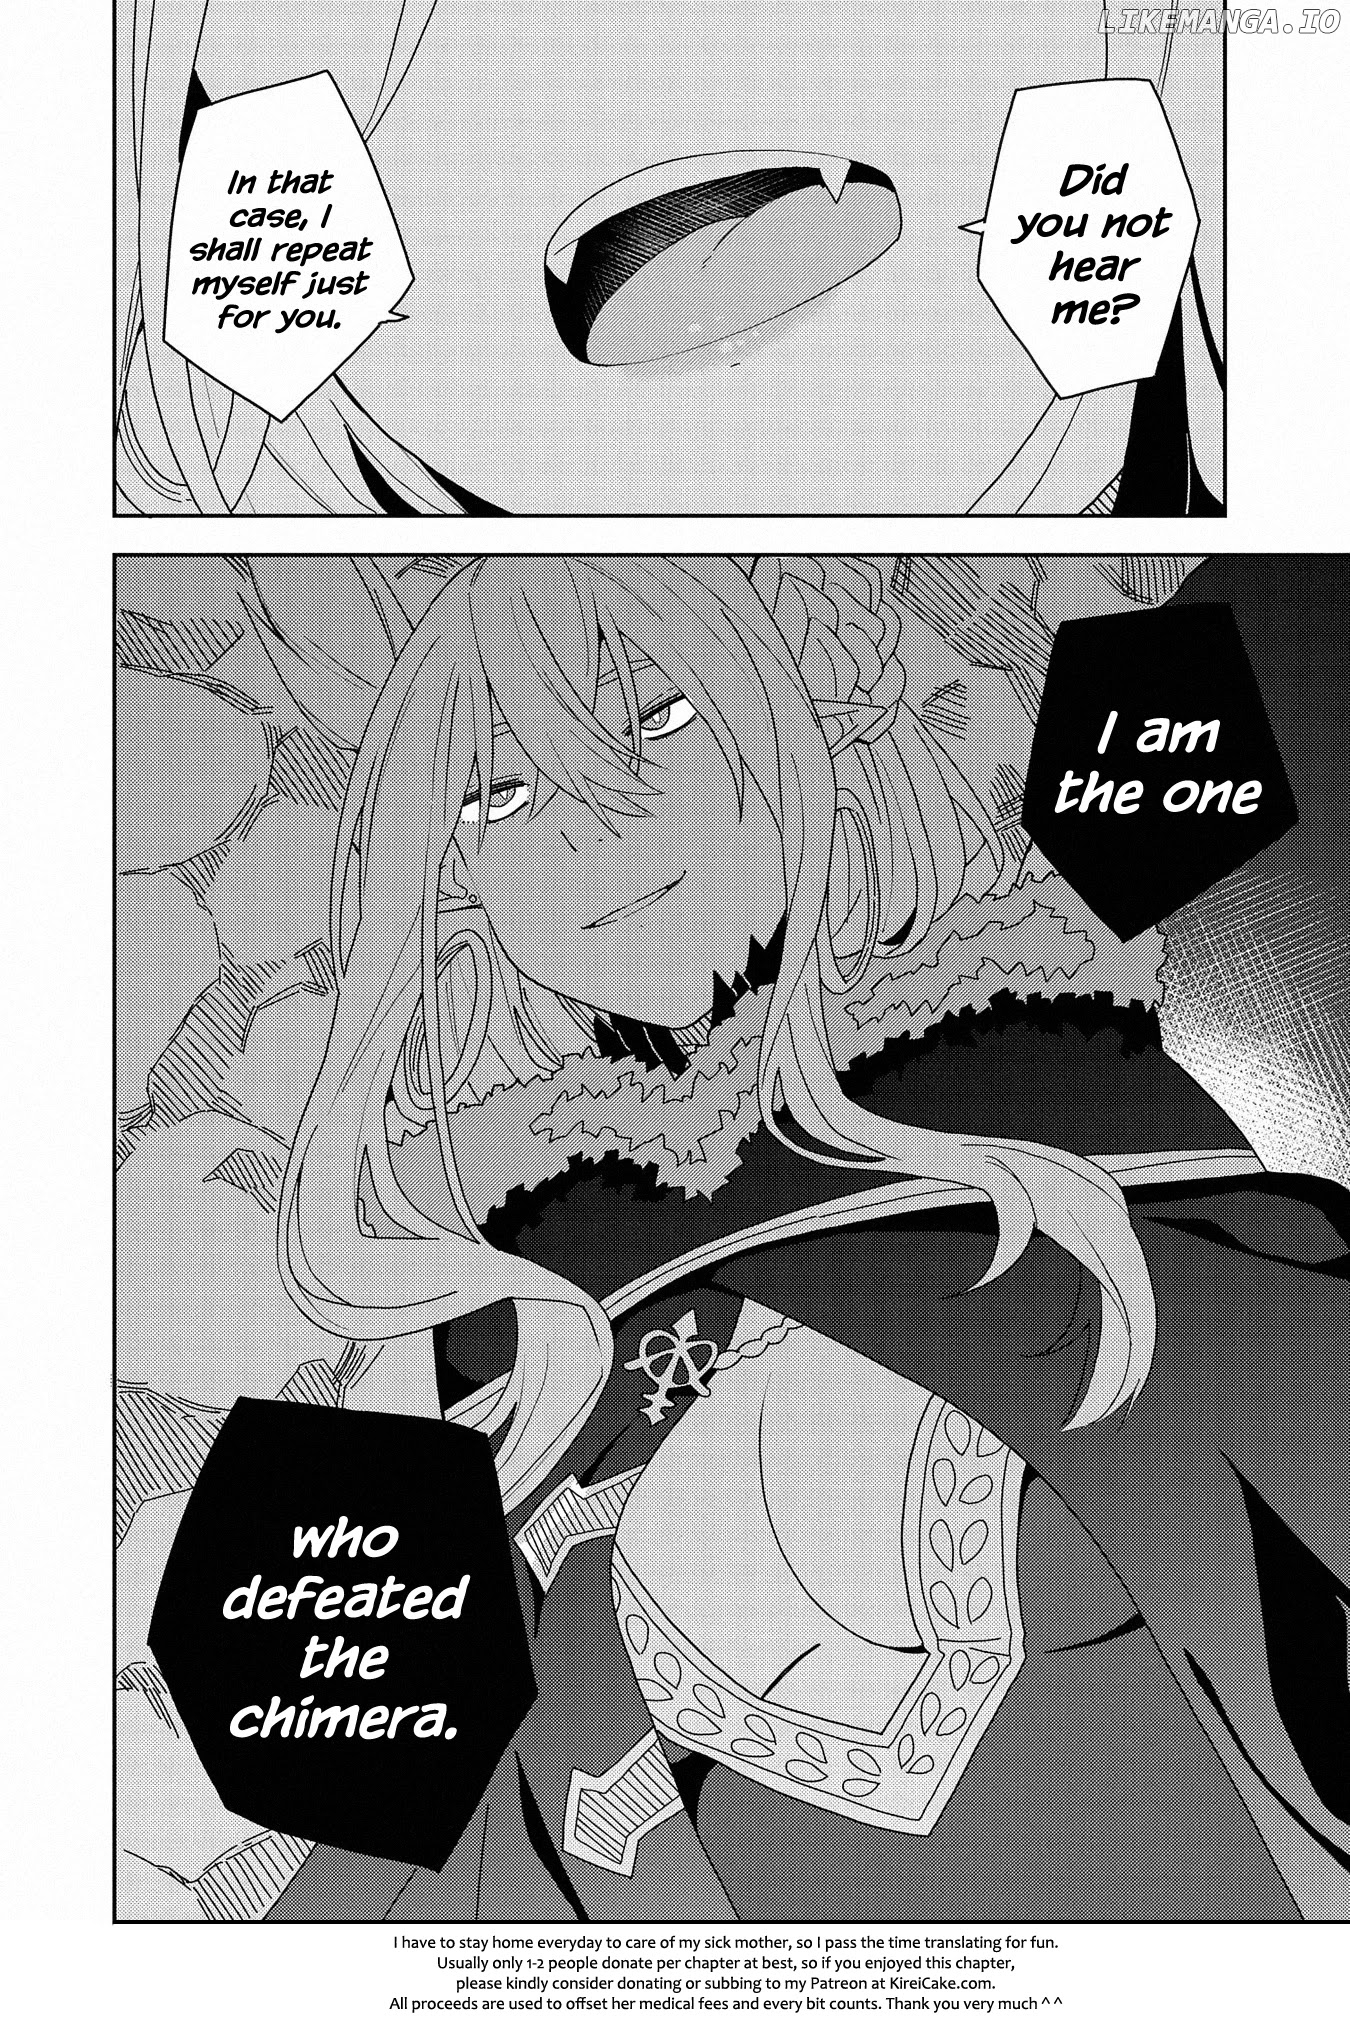 I Summoned The Devil To Grant Me a Wish, But I Married Her Instead Since She Was Adorable ~My New Devil Wife~ chapter 7 - page 30